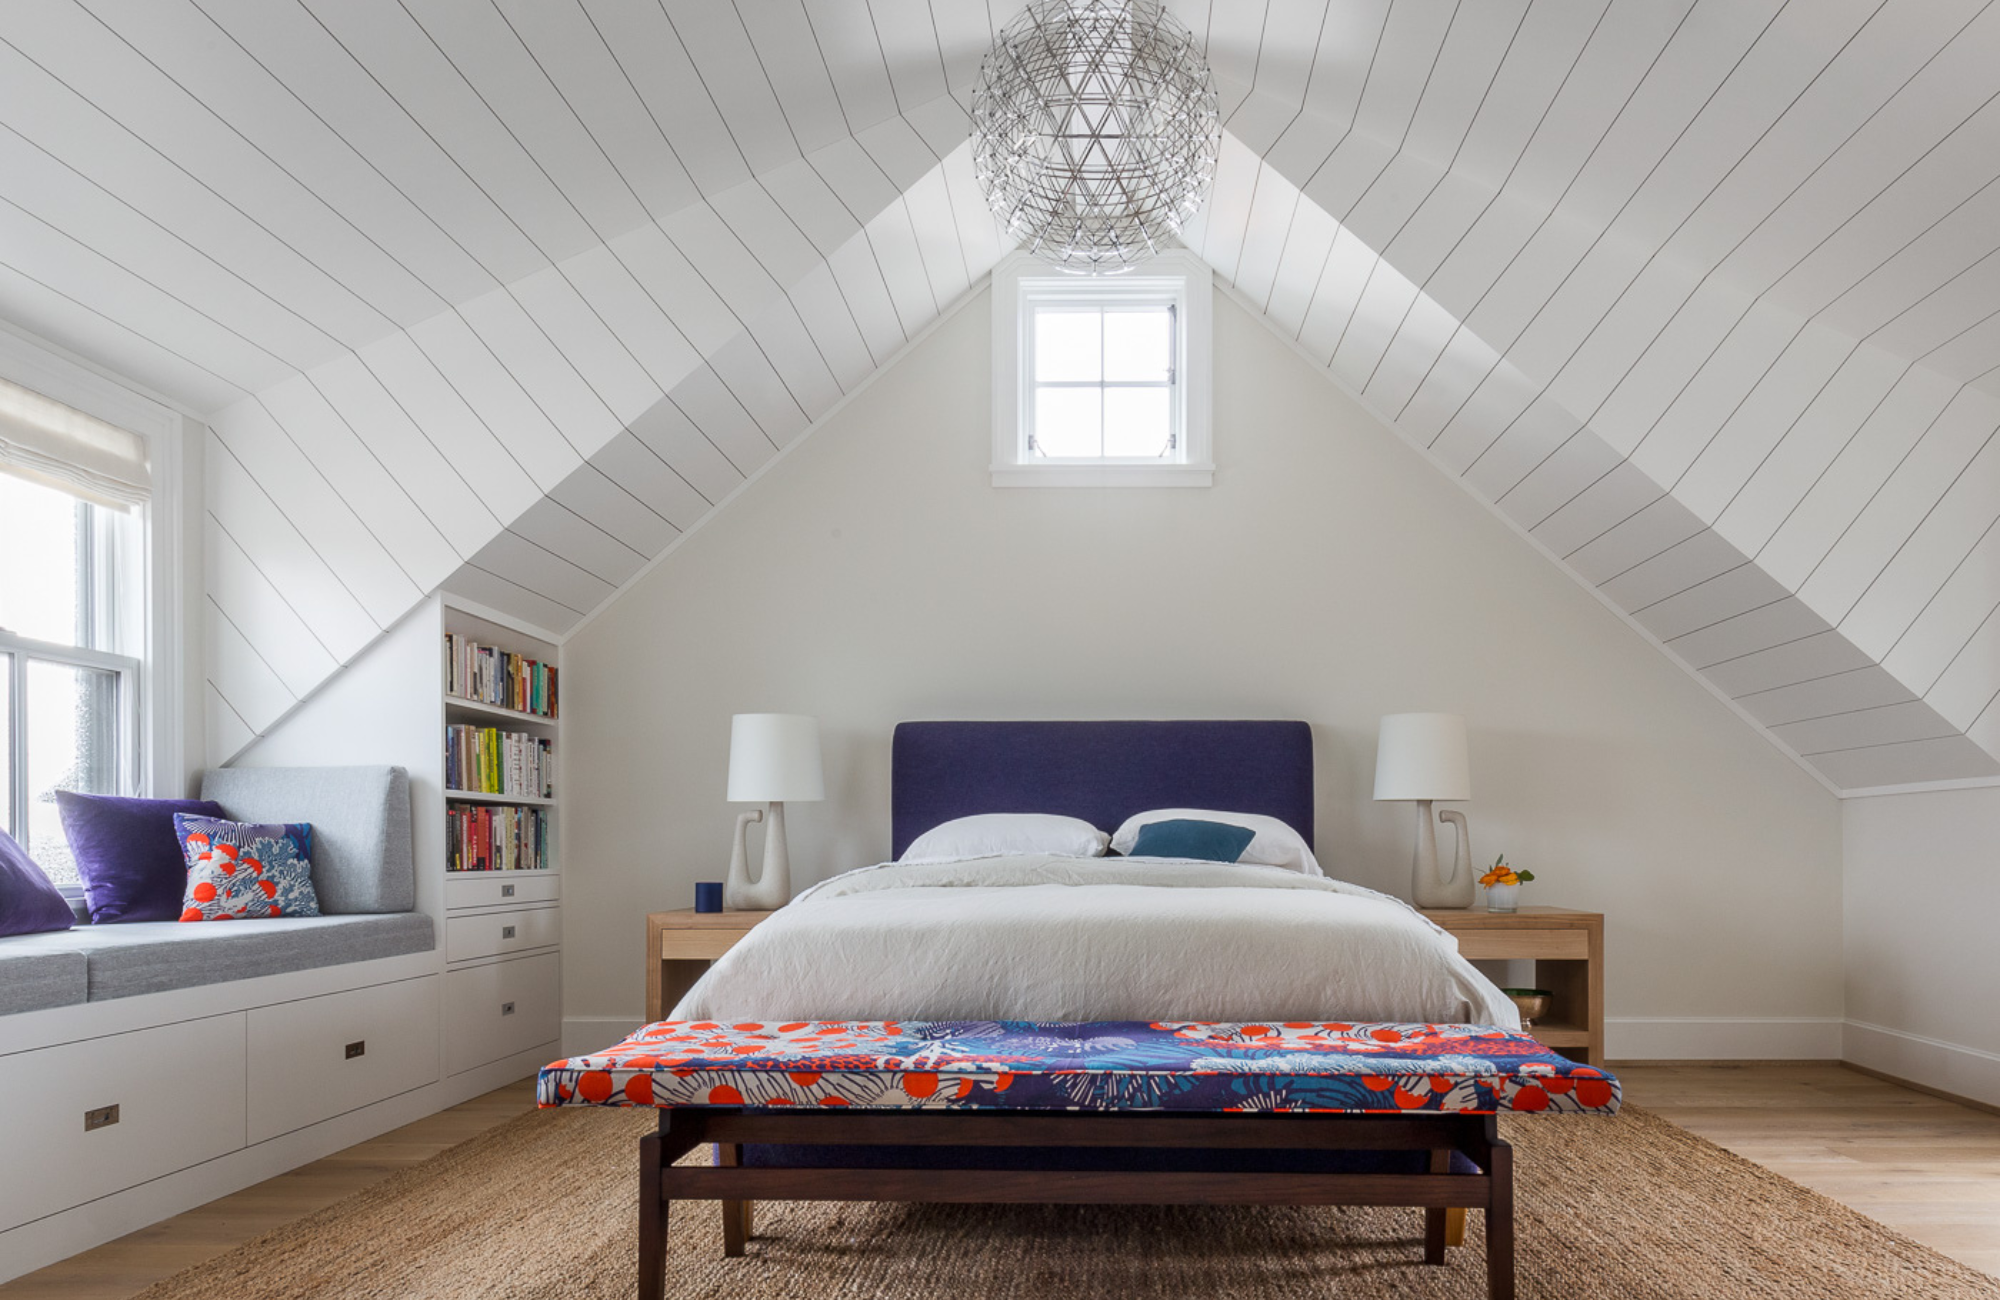 coddington-design-beach-inspired-bedroom-bay-area-interiors-shiplap-ceiling-timeless-chandelier-window-seat-colorful-bench